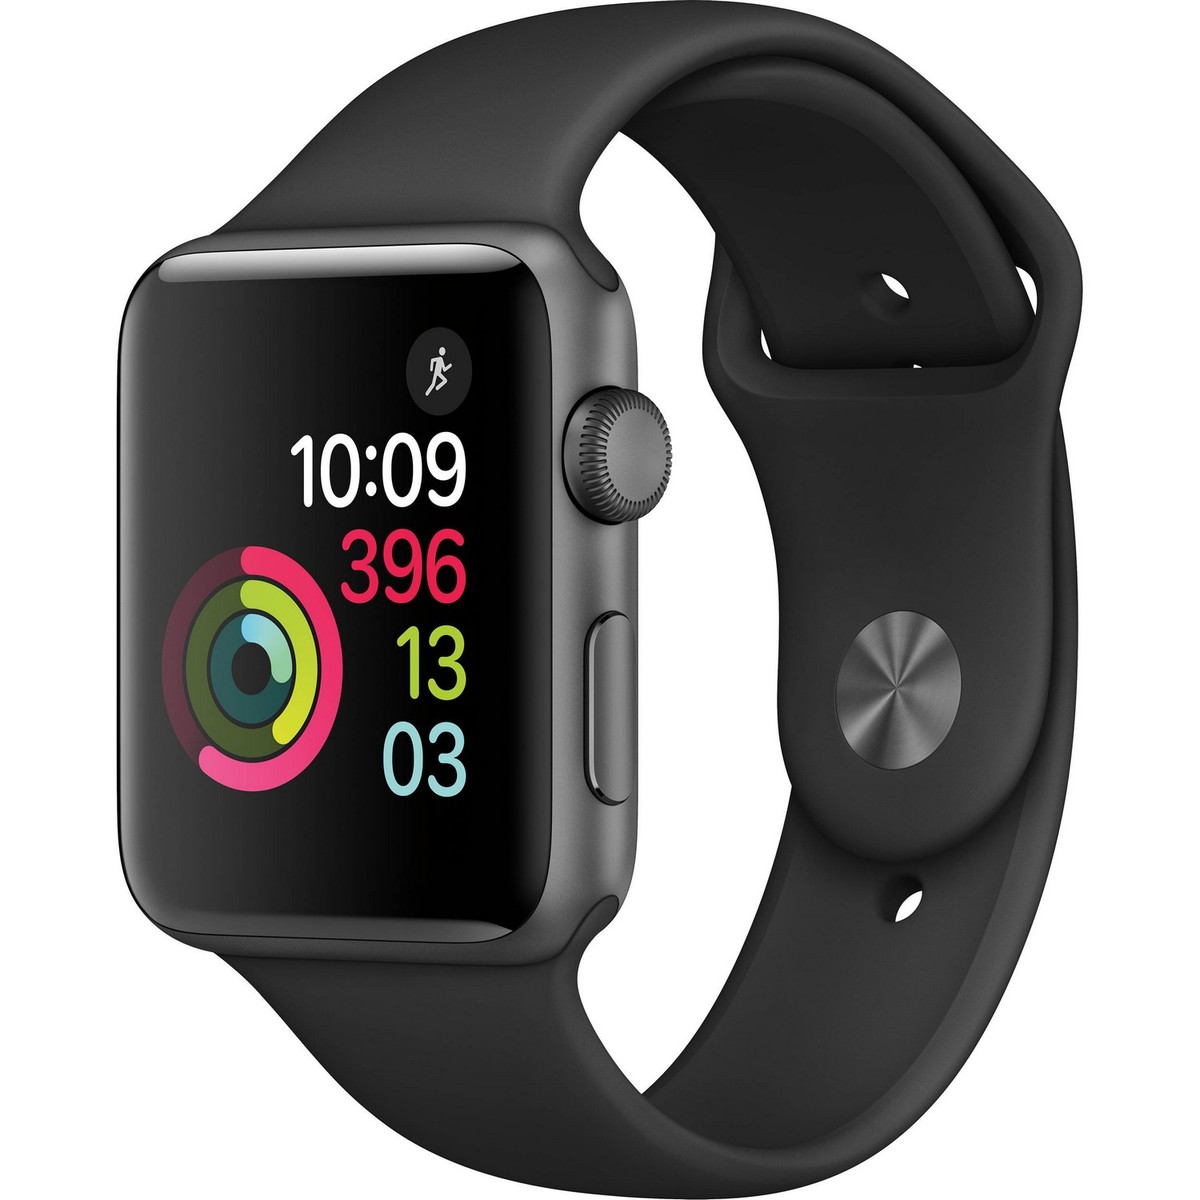 Apple Watch Series 2 Sport MP062 42mm Space Gray Aluminum Case with Black Sport Band